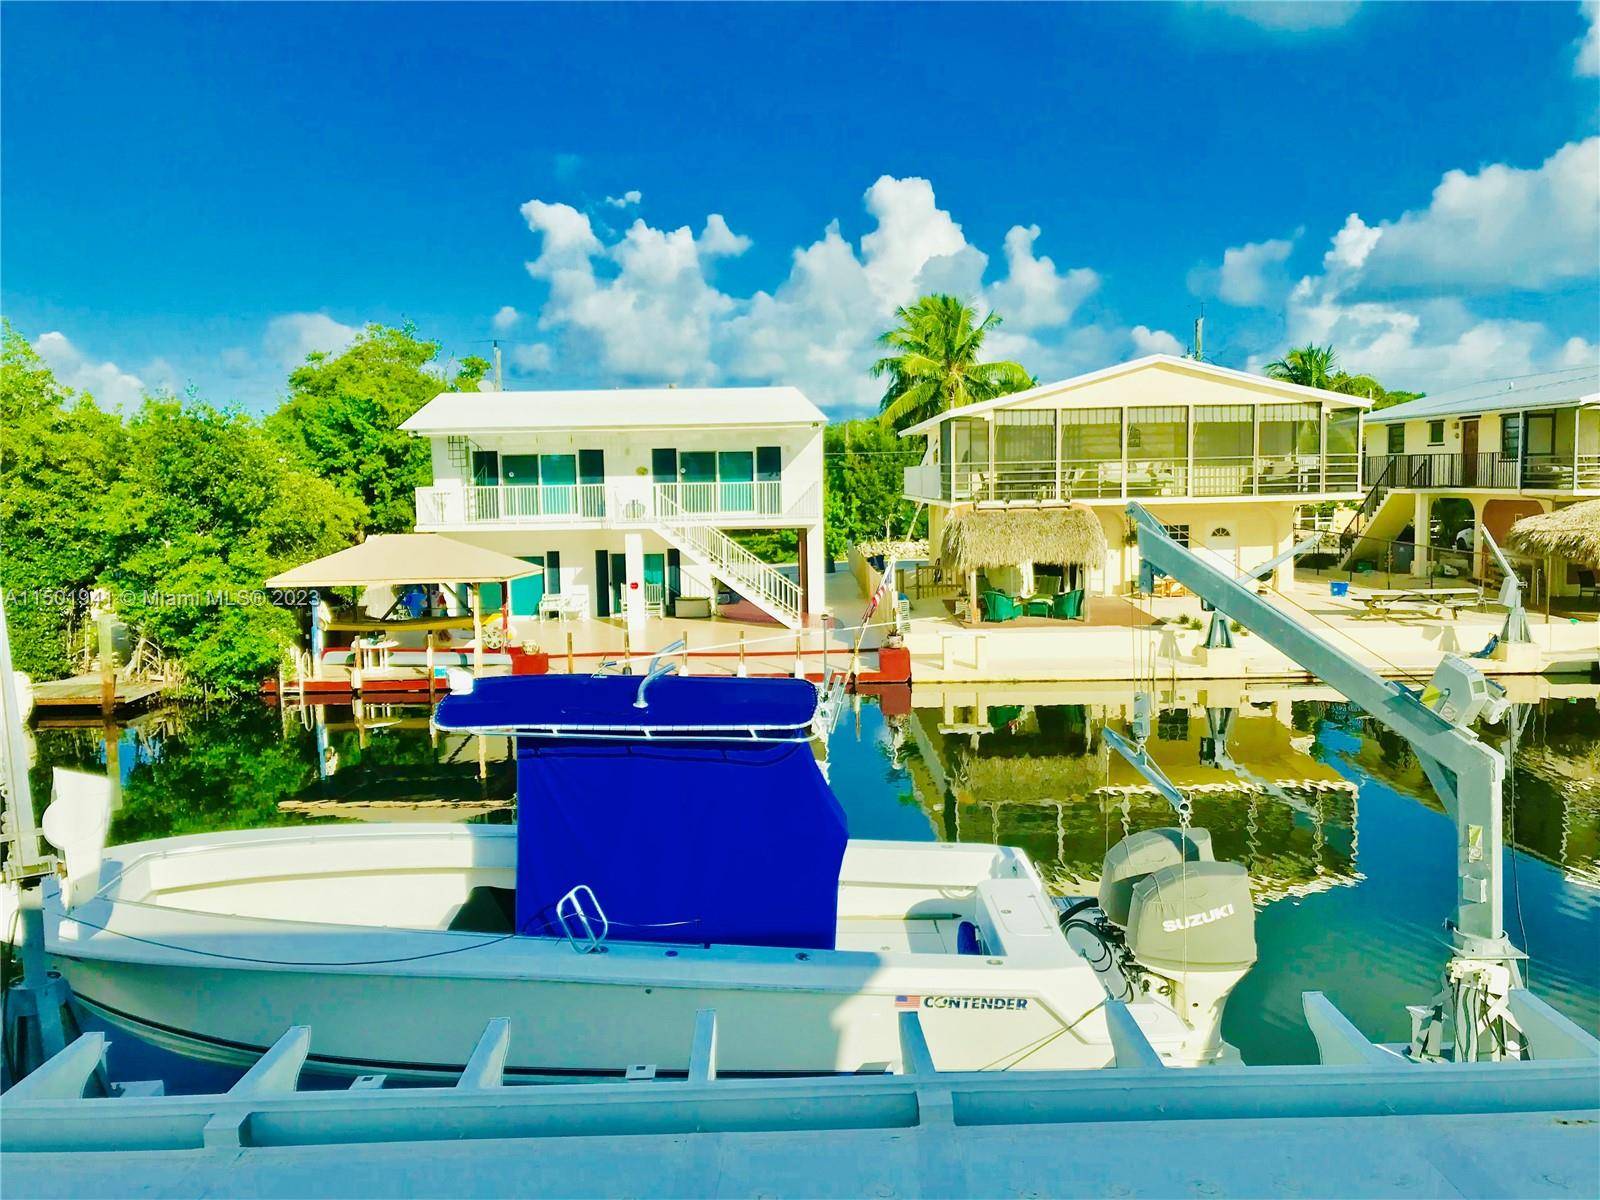 This UNIQUE and rarely to be found property is 1, 496 SF living space, 3bed 2baths, waterfront direct bay access, private concrete dock for a 30 FT boat with amazing ...